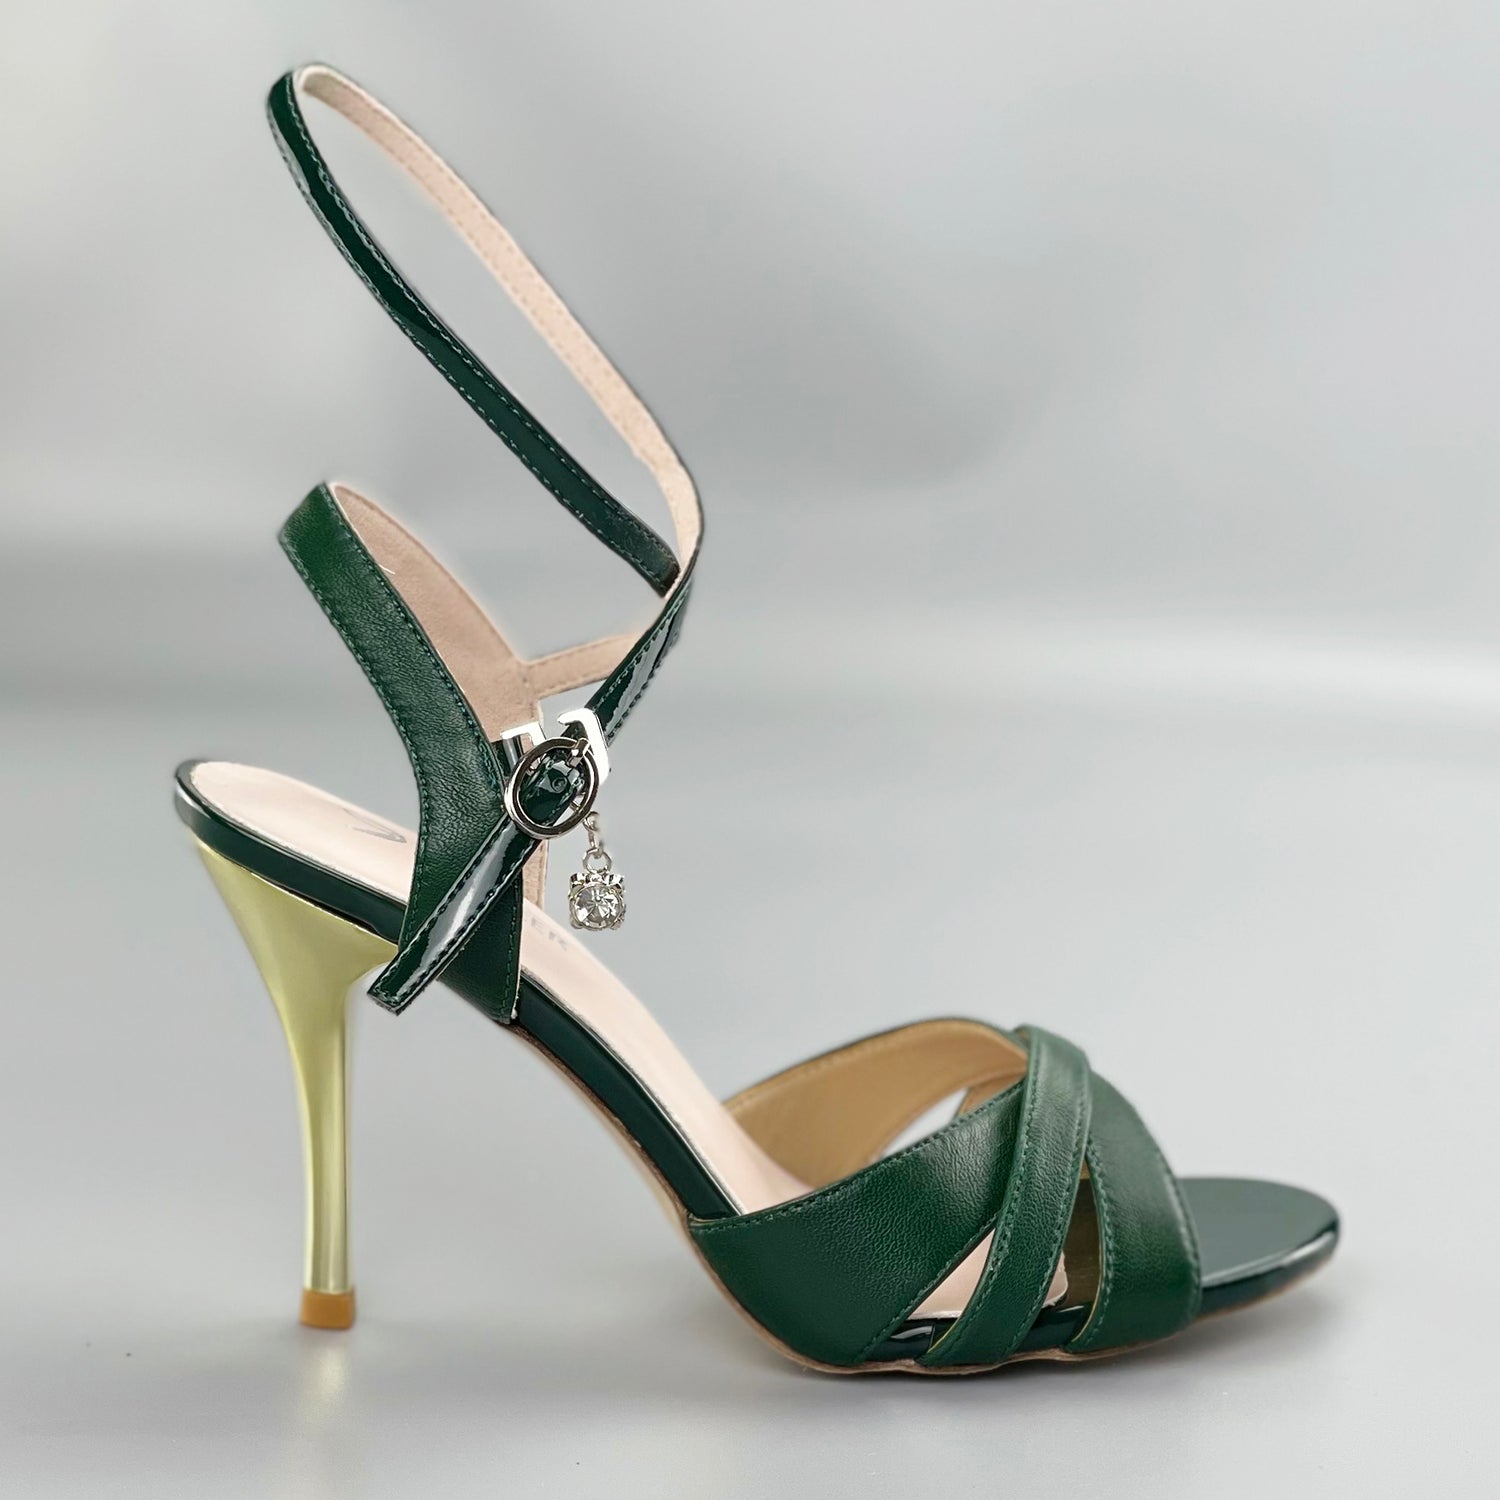 Pro Dancer Peep-toe Argentine Tango Shoes with Closed-back High Heels and Hard Leather Sole in Green3